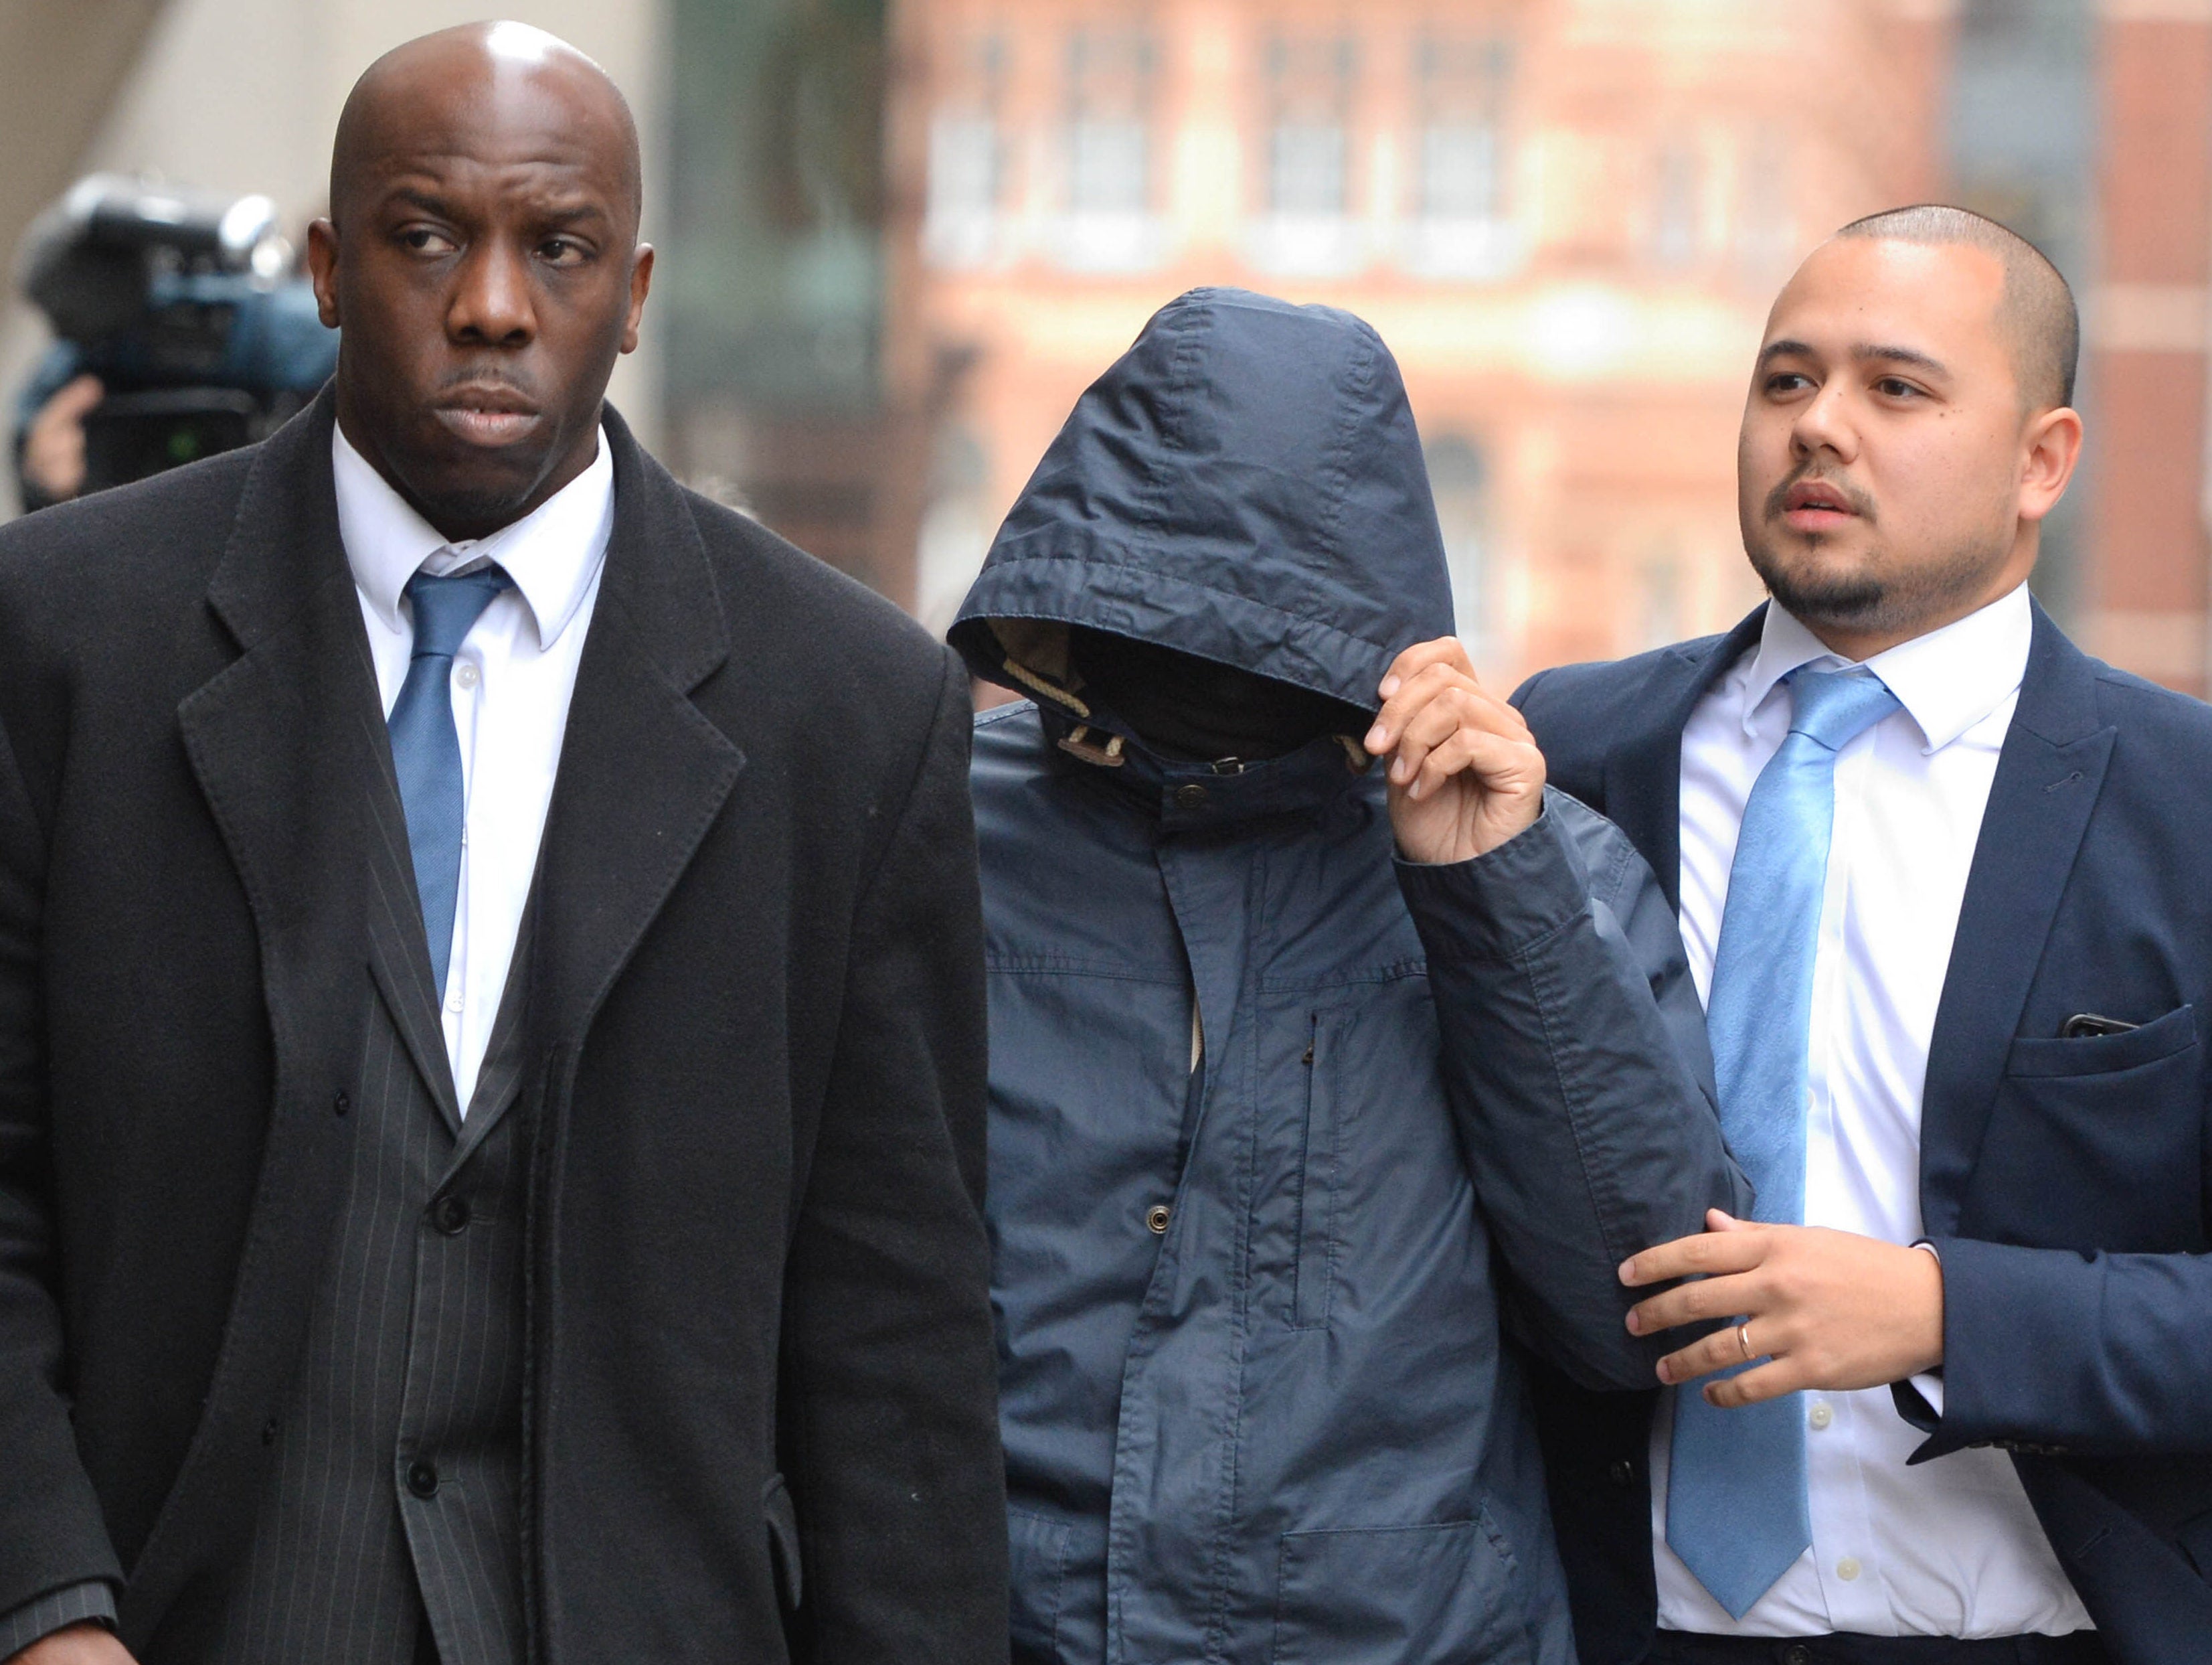 Mazher Mahmood jailed for 15 months as lawyer says undercover Sun reporter's 'career is over'